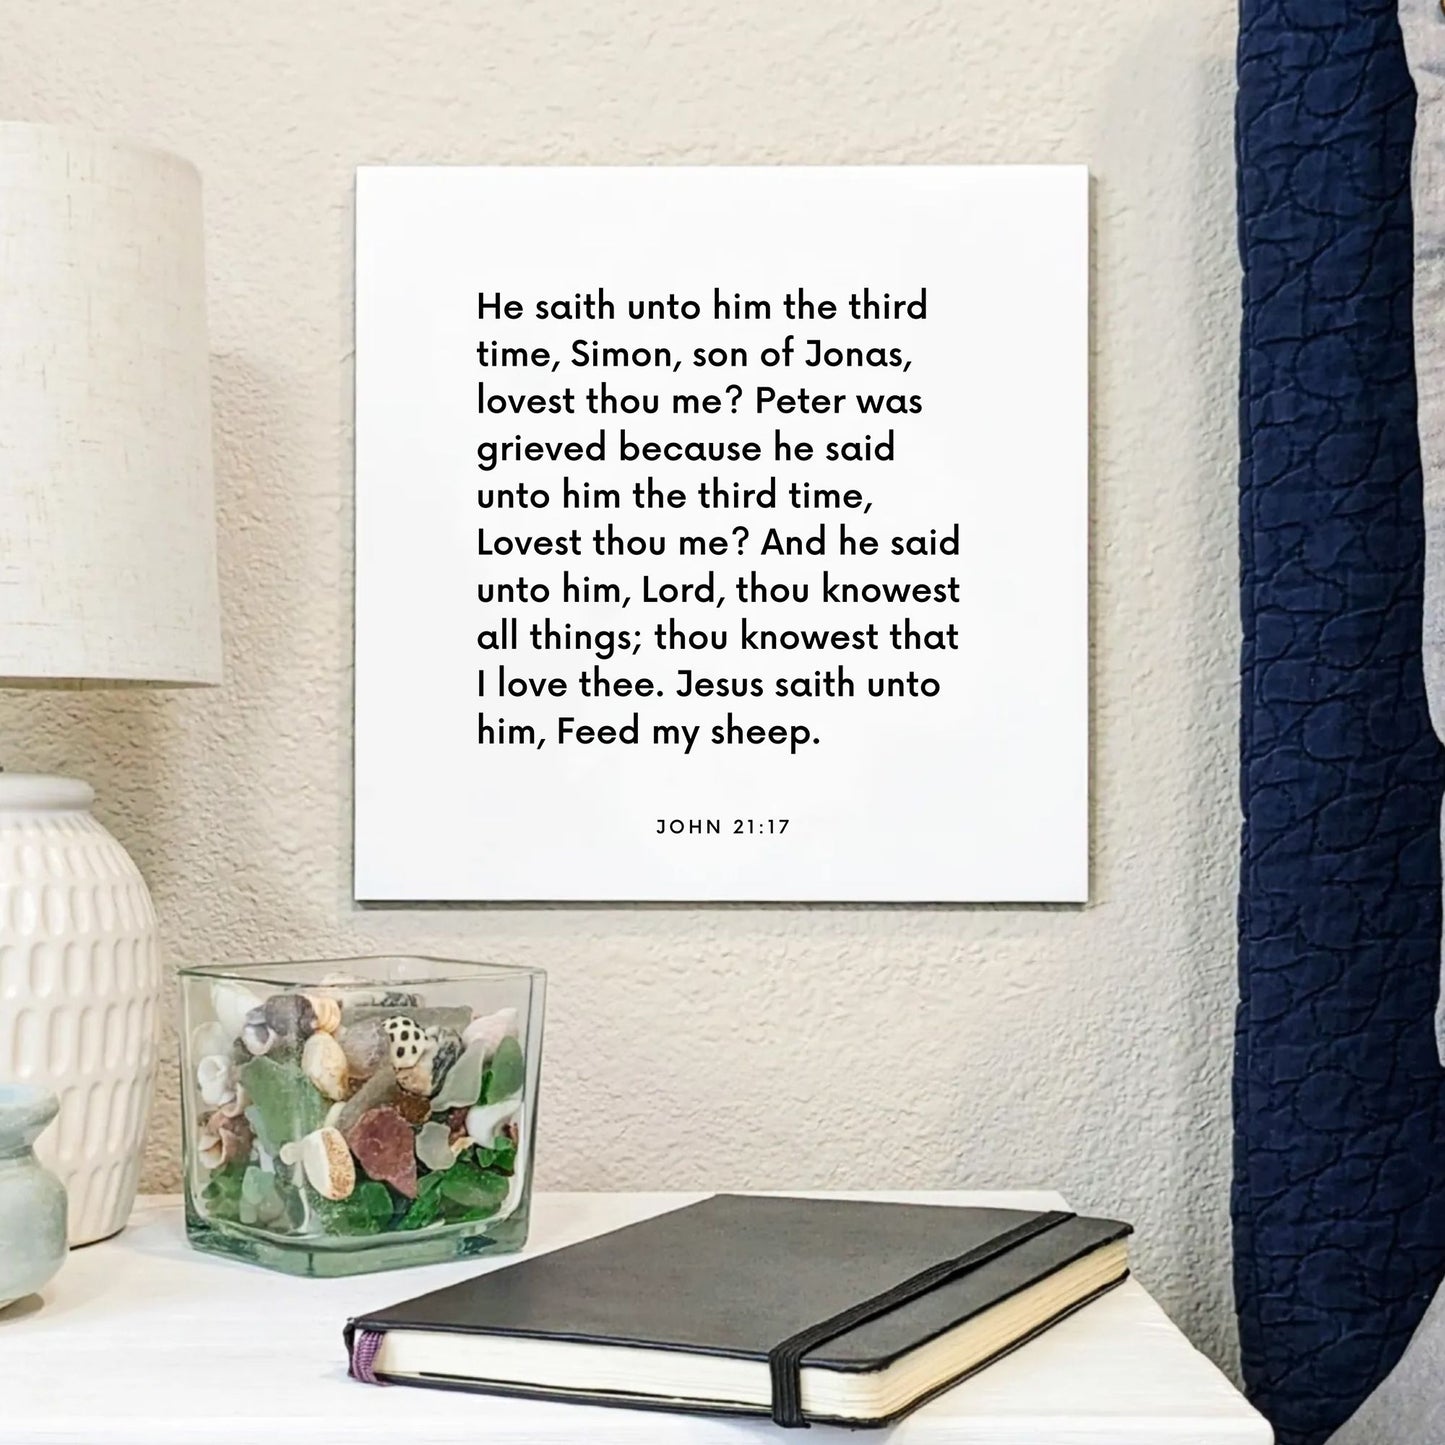 Bedside mouting of the scripture tile for John 21:17 - "Simon, lovest thou me? Feed my sheep."